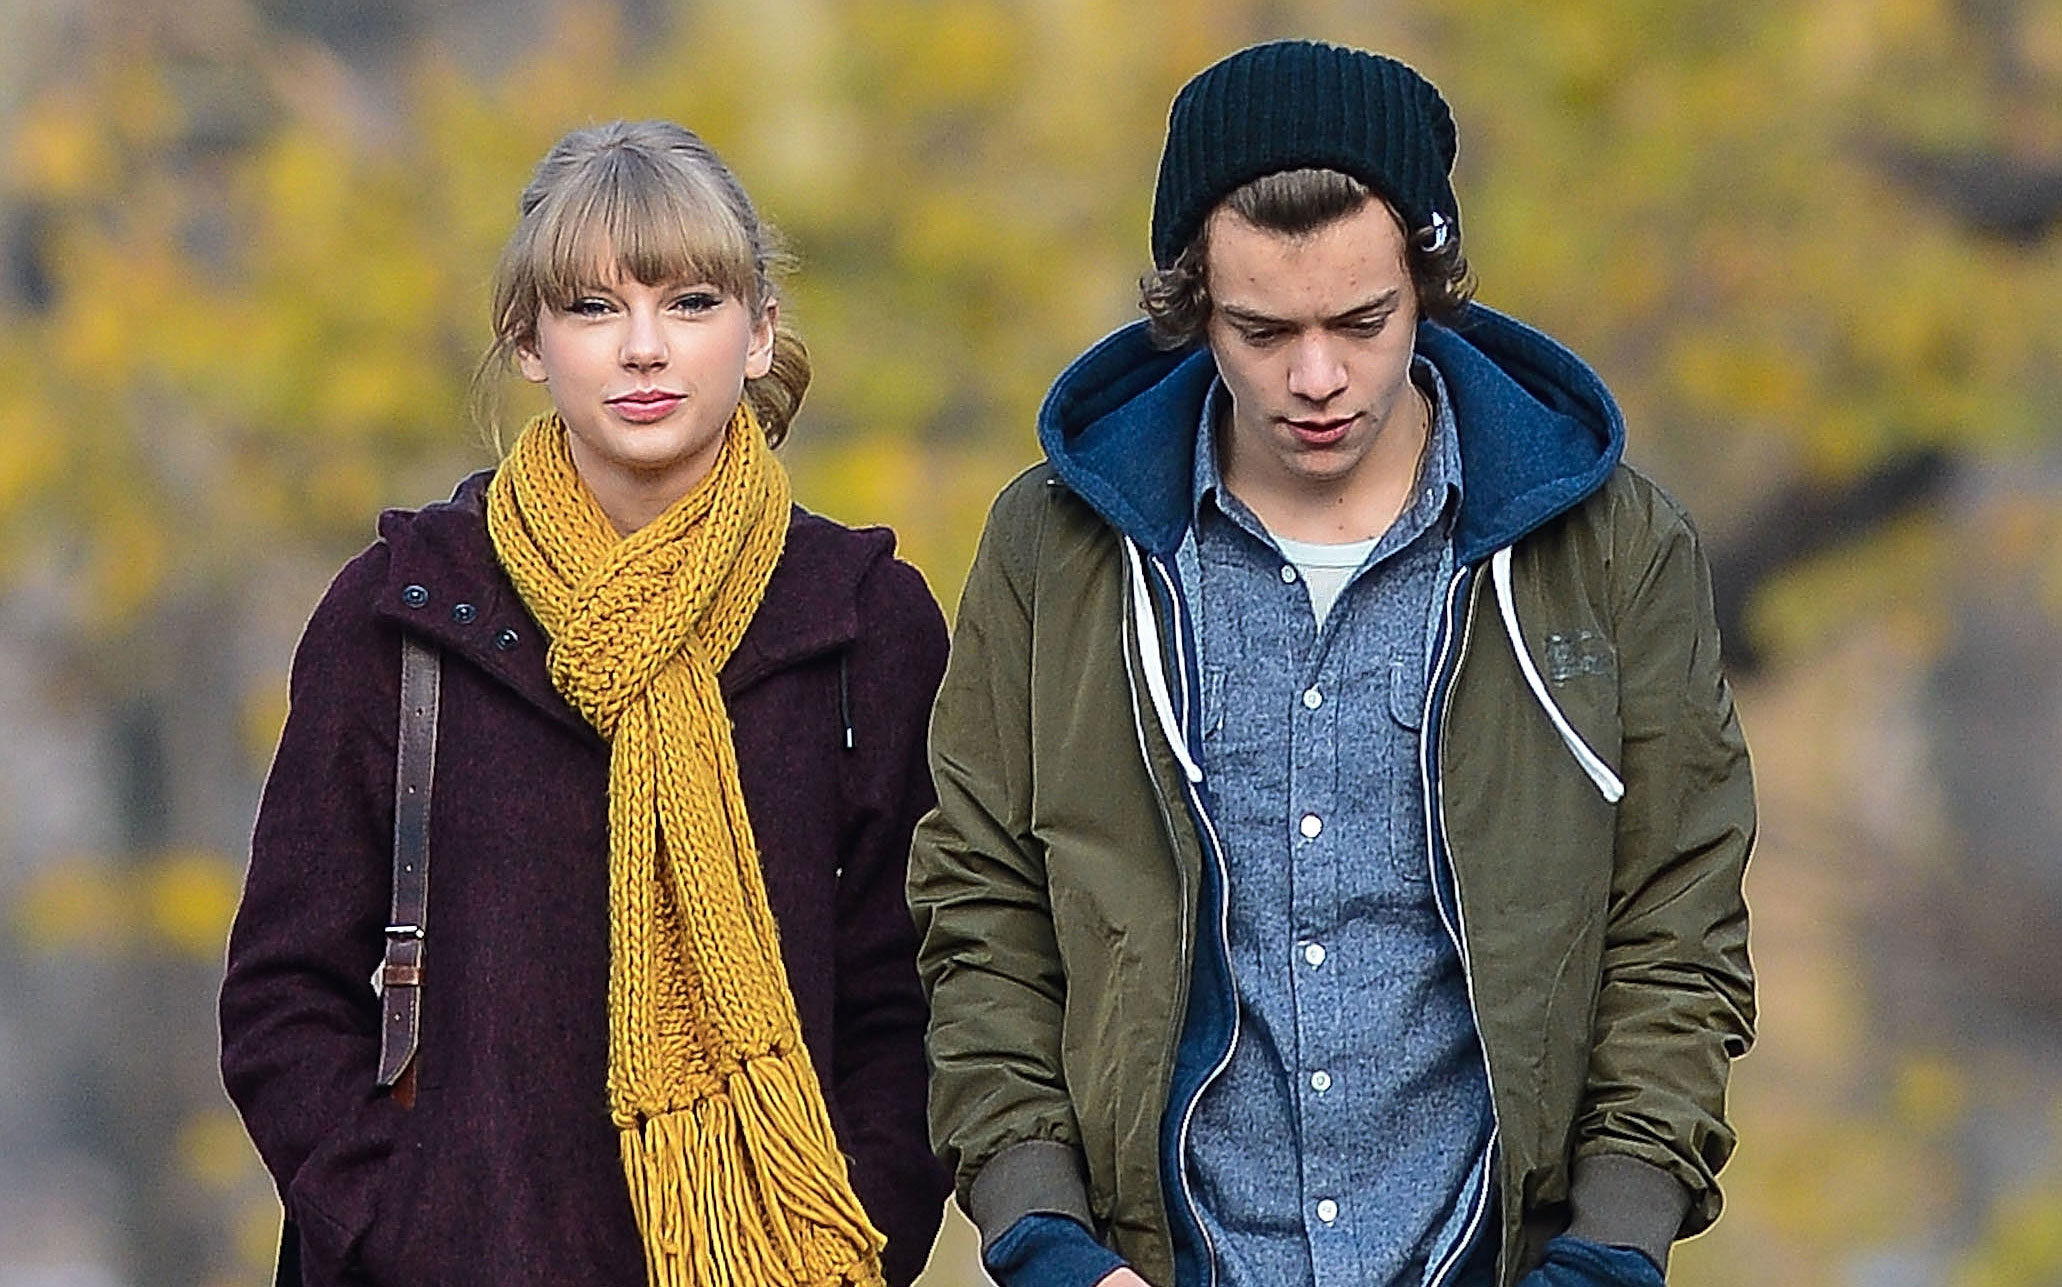 Harry Styles Sang A Taylor Swift Song & Fans Have Absolutely Fkn Lost It